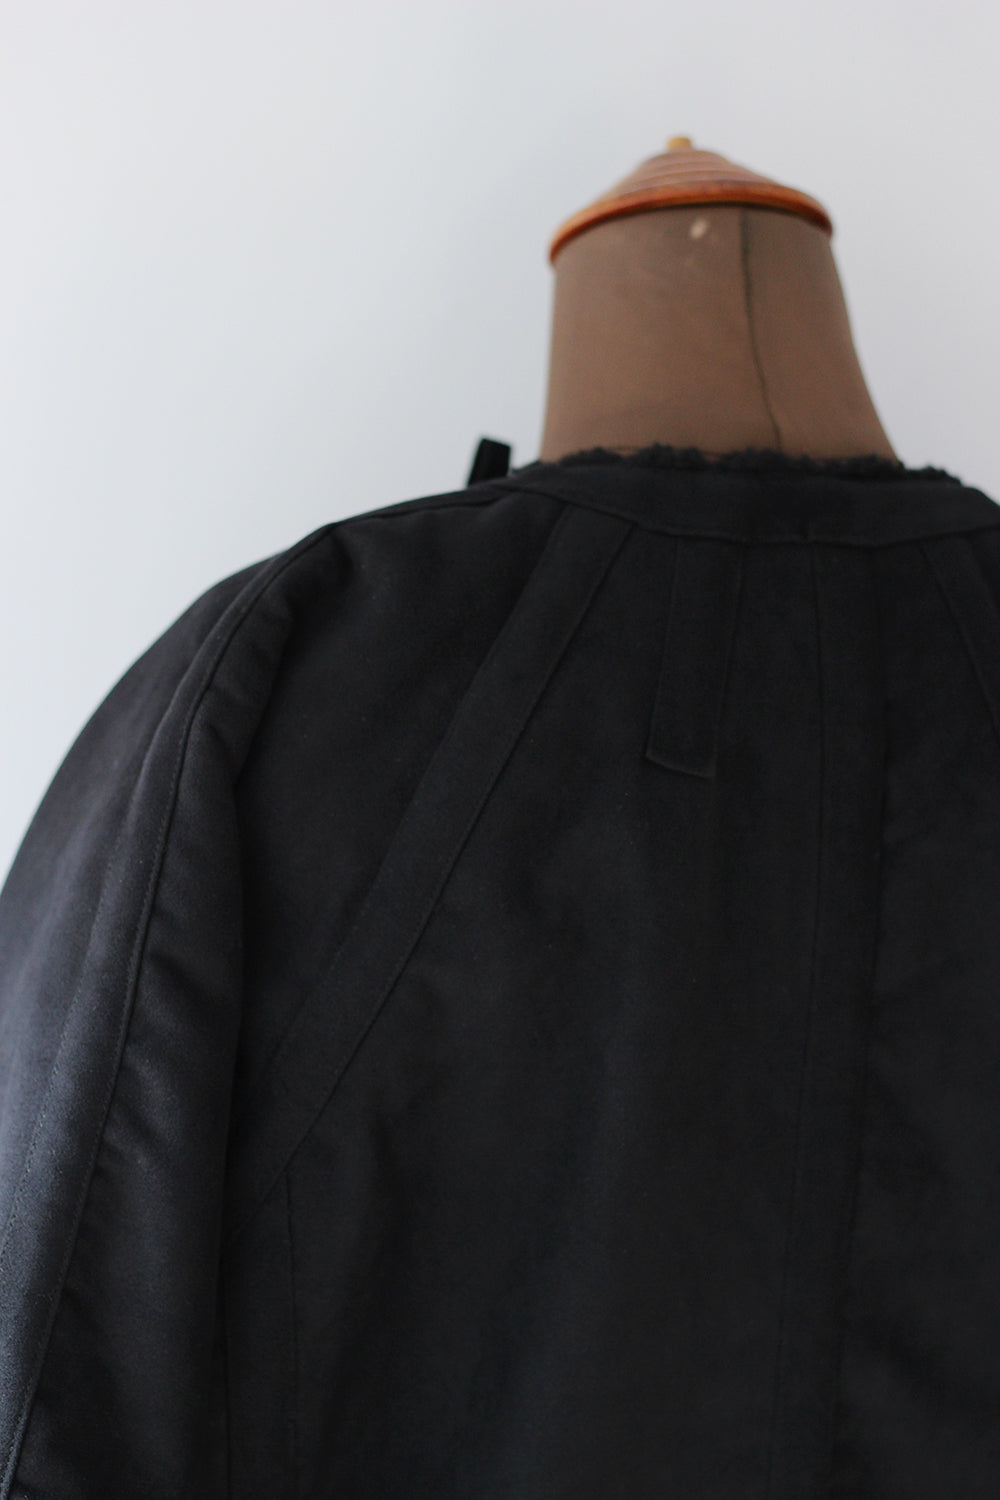 WRYHT "DOUBLE FACE TAPED LINER JACKET" (black)